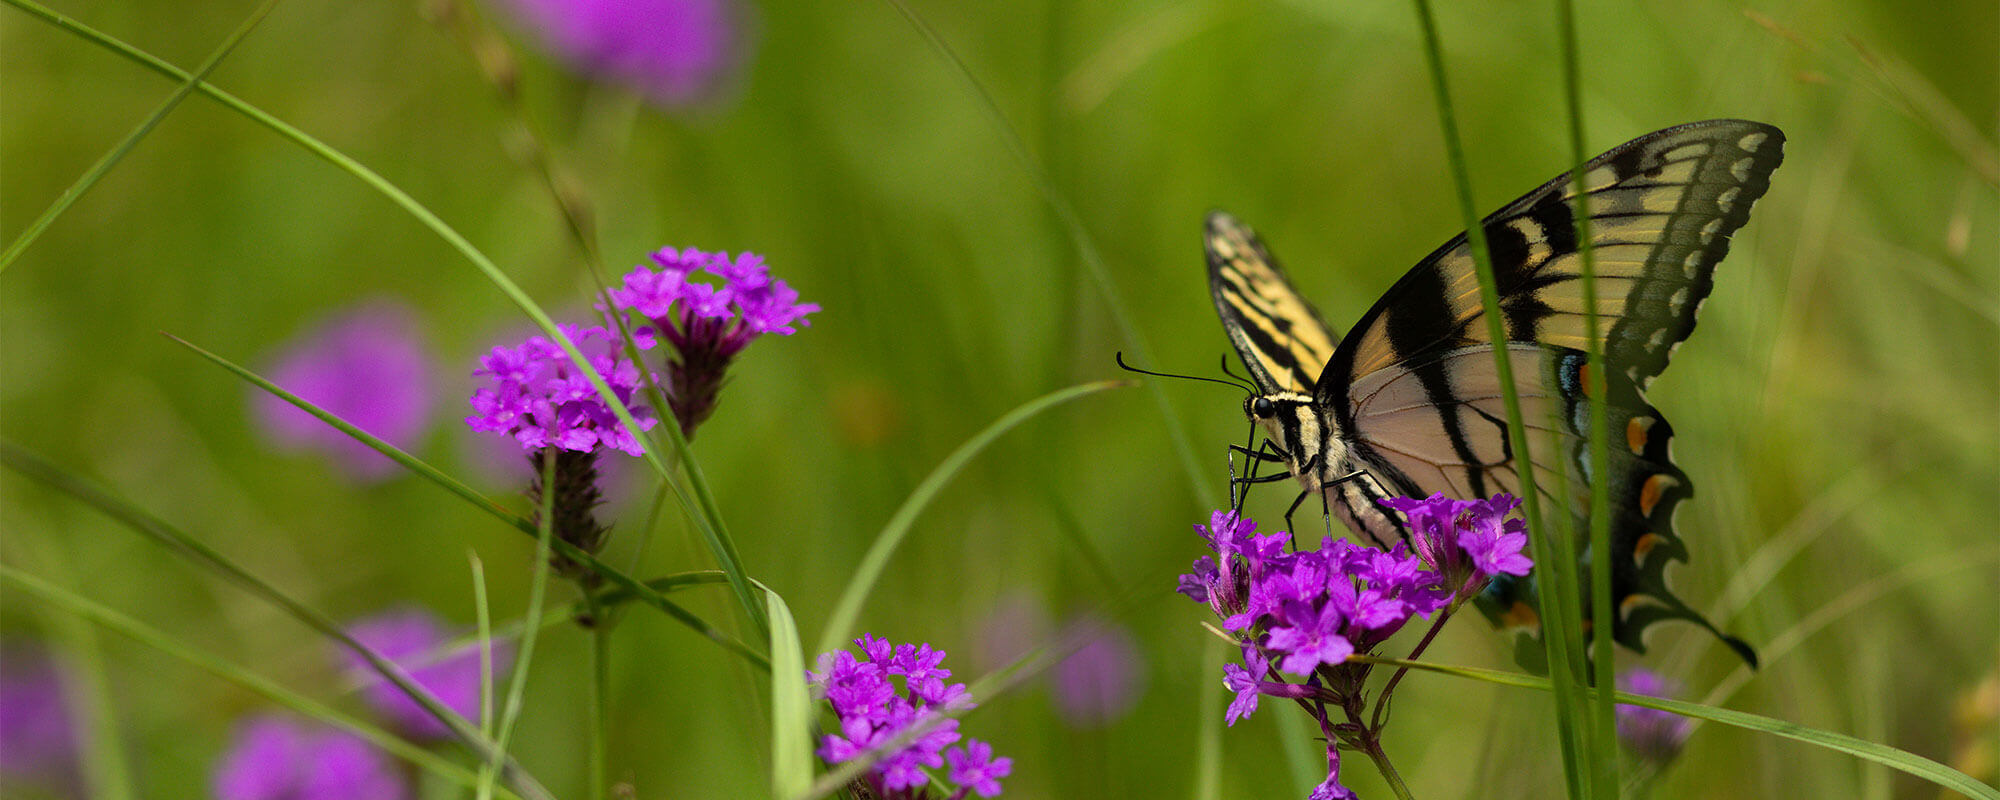 Butterfly resting on flower in pasture